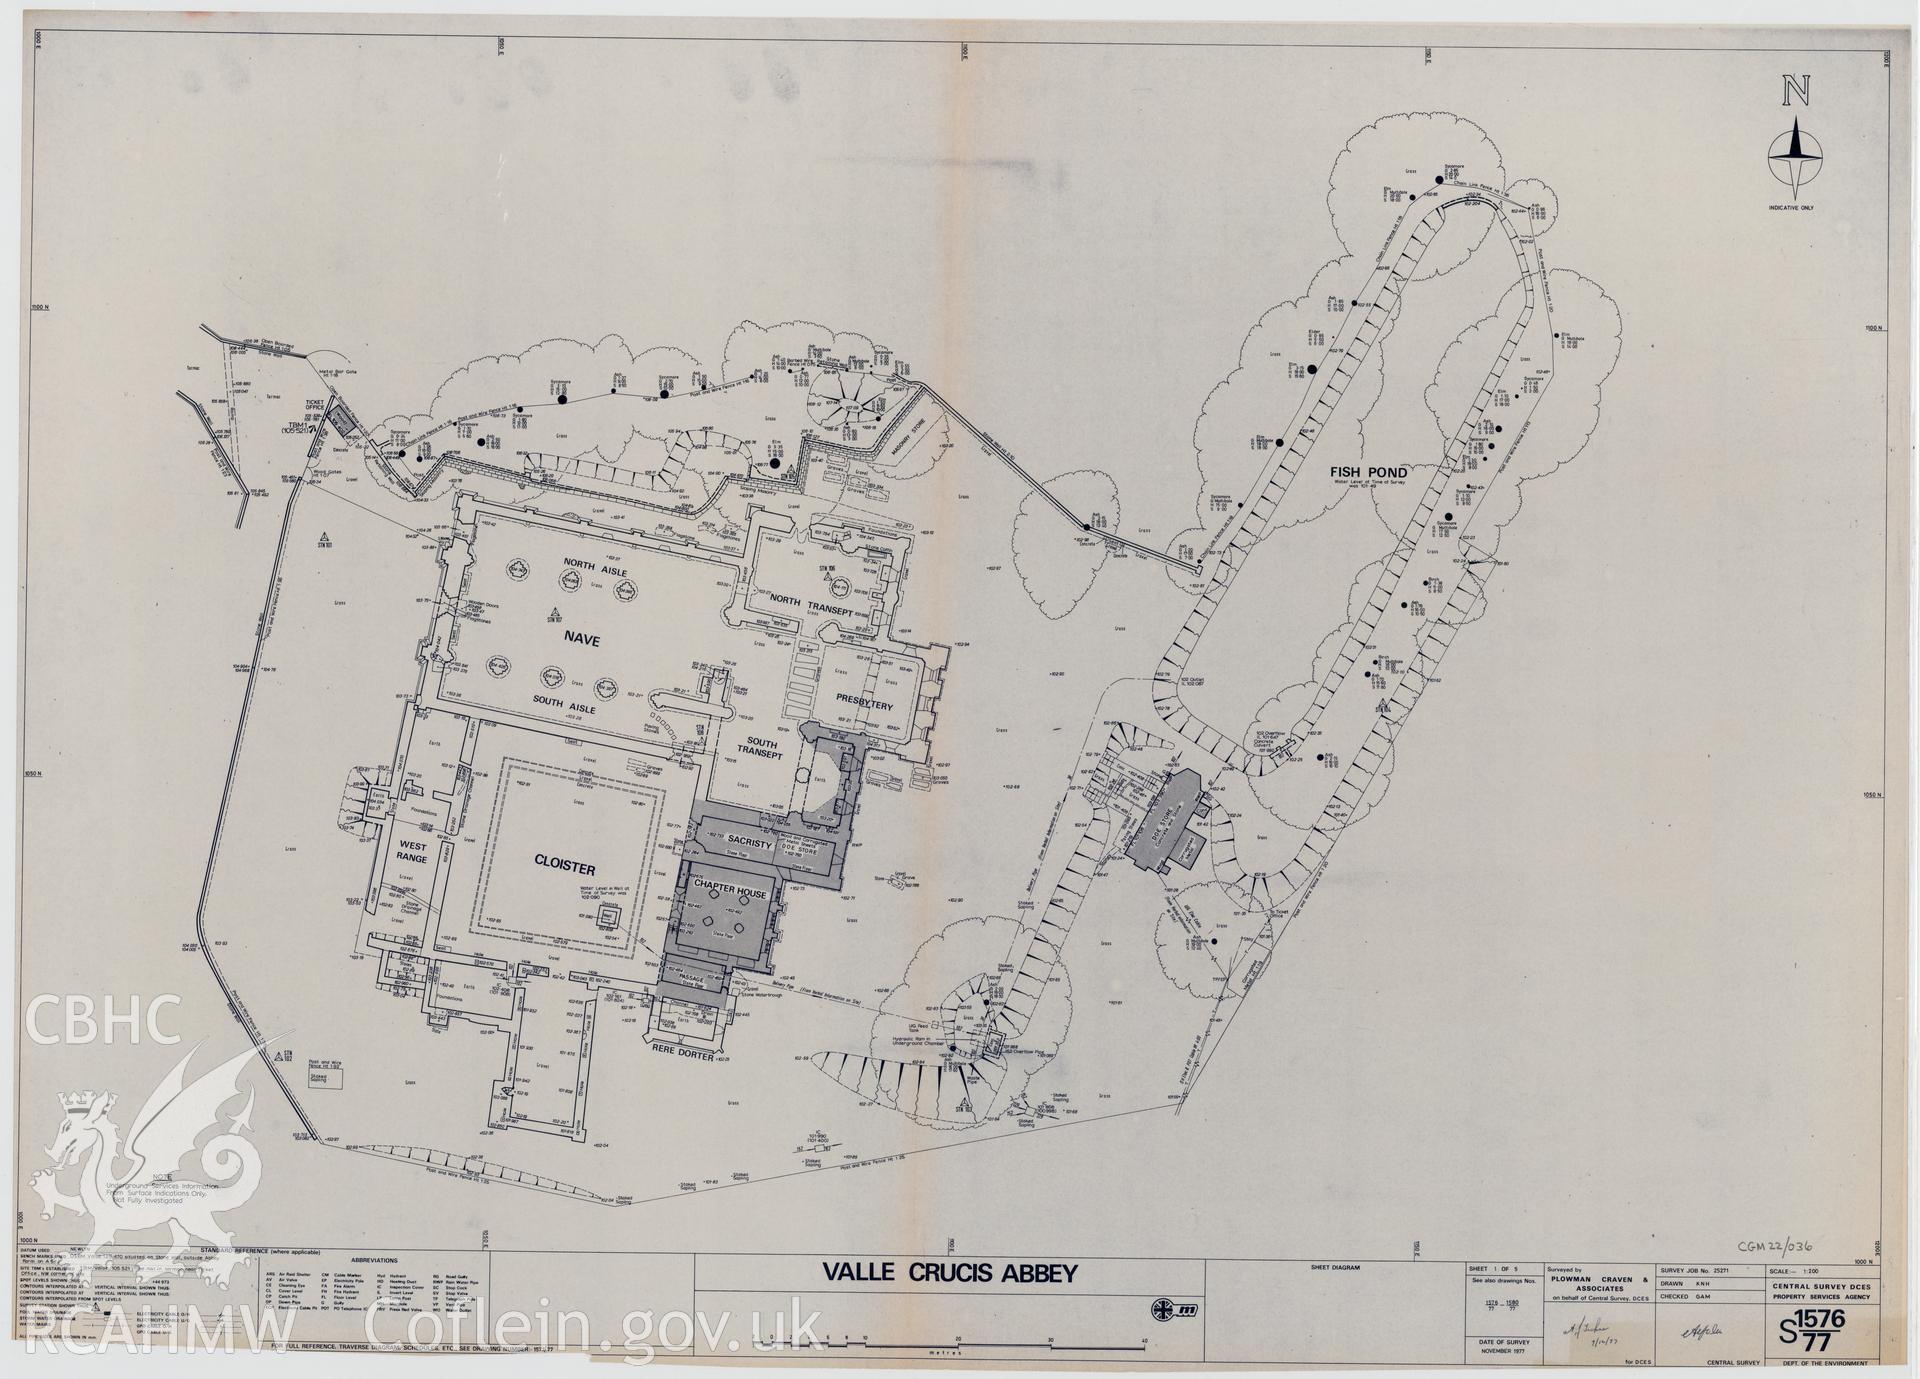 Cadw guardianship monument,  drawing (1 of 5) of ground plan showing services (scale 1:200), of Valle Crucis Abbey, dated December 1977.